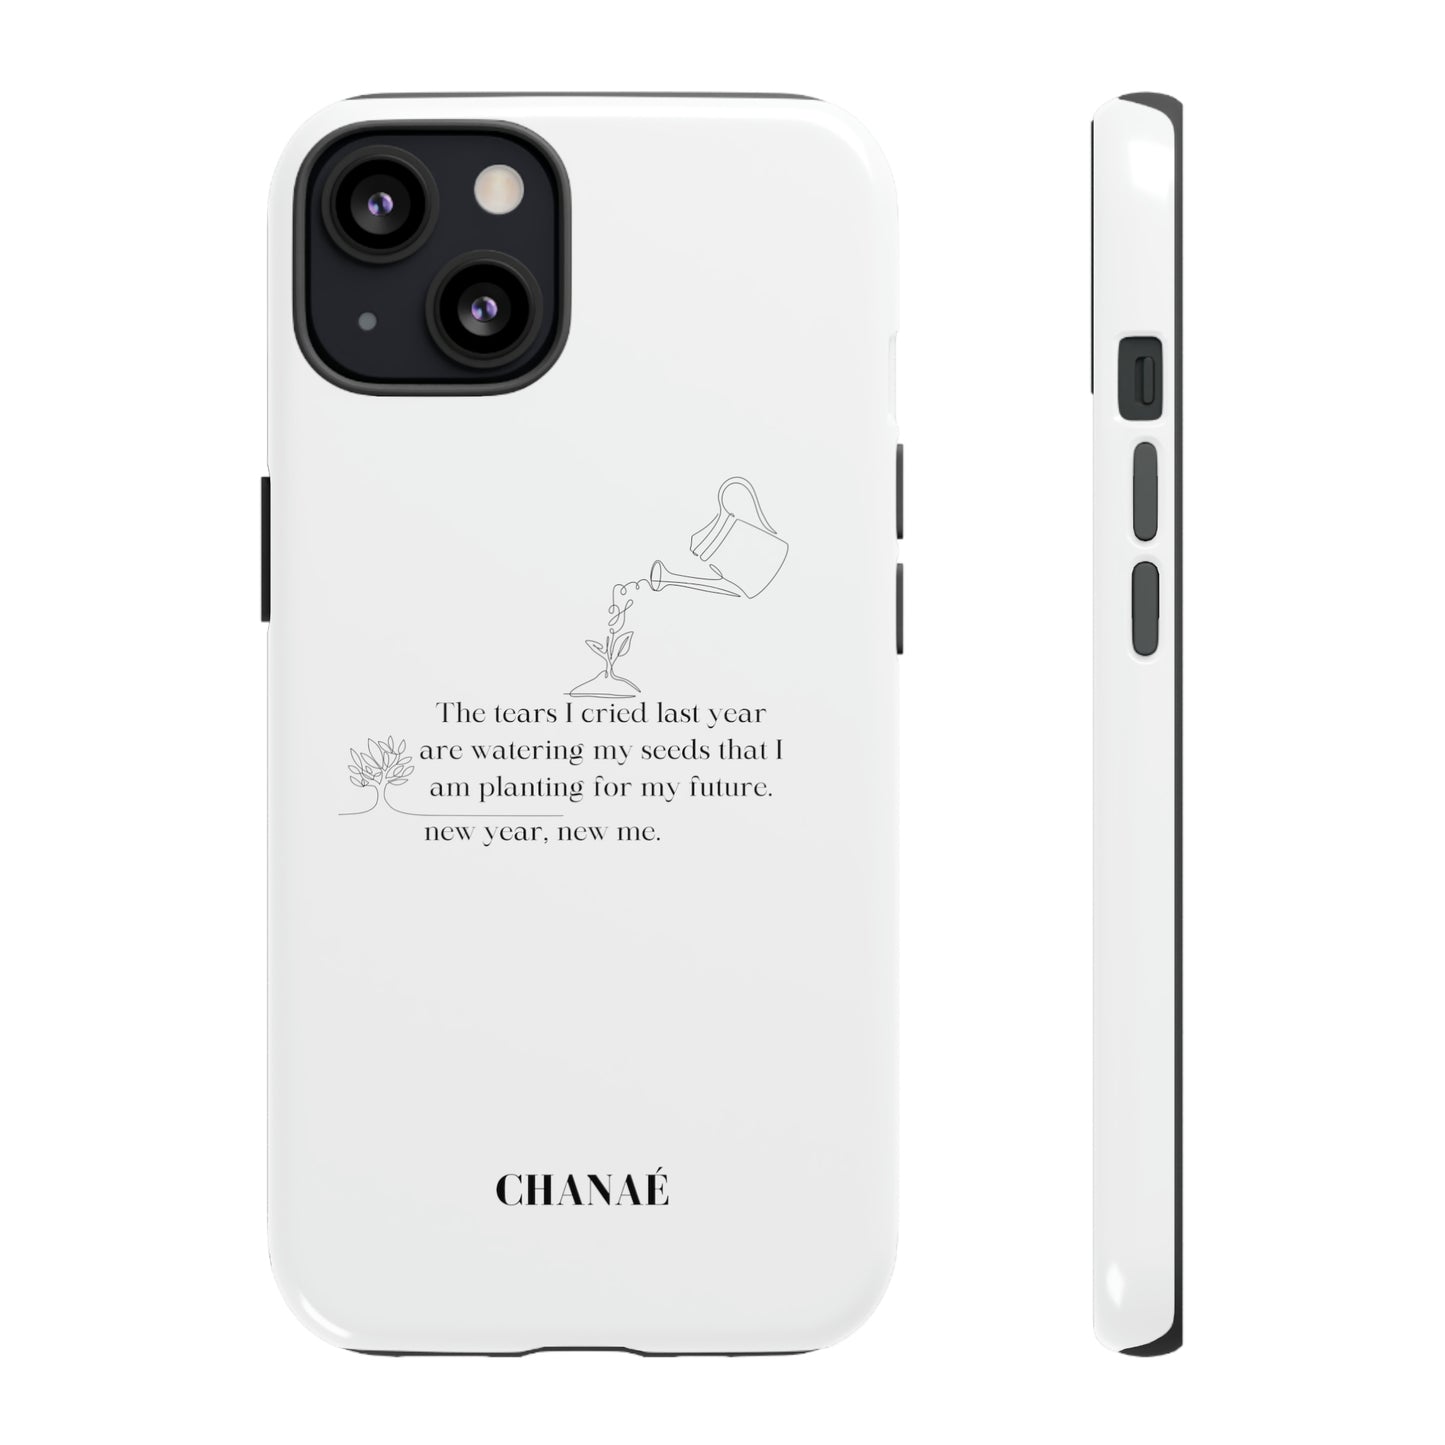 Last Year's Tears iPhone "Tough" Case (White)